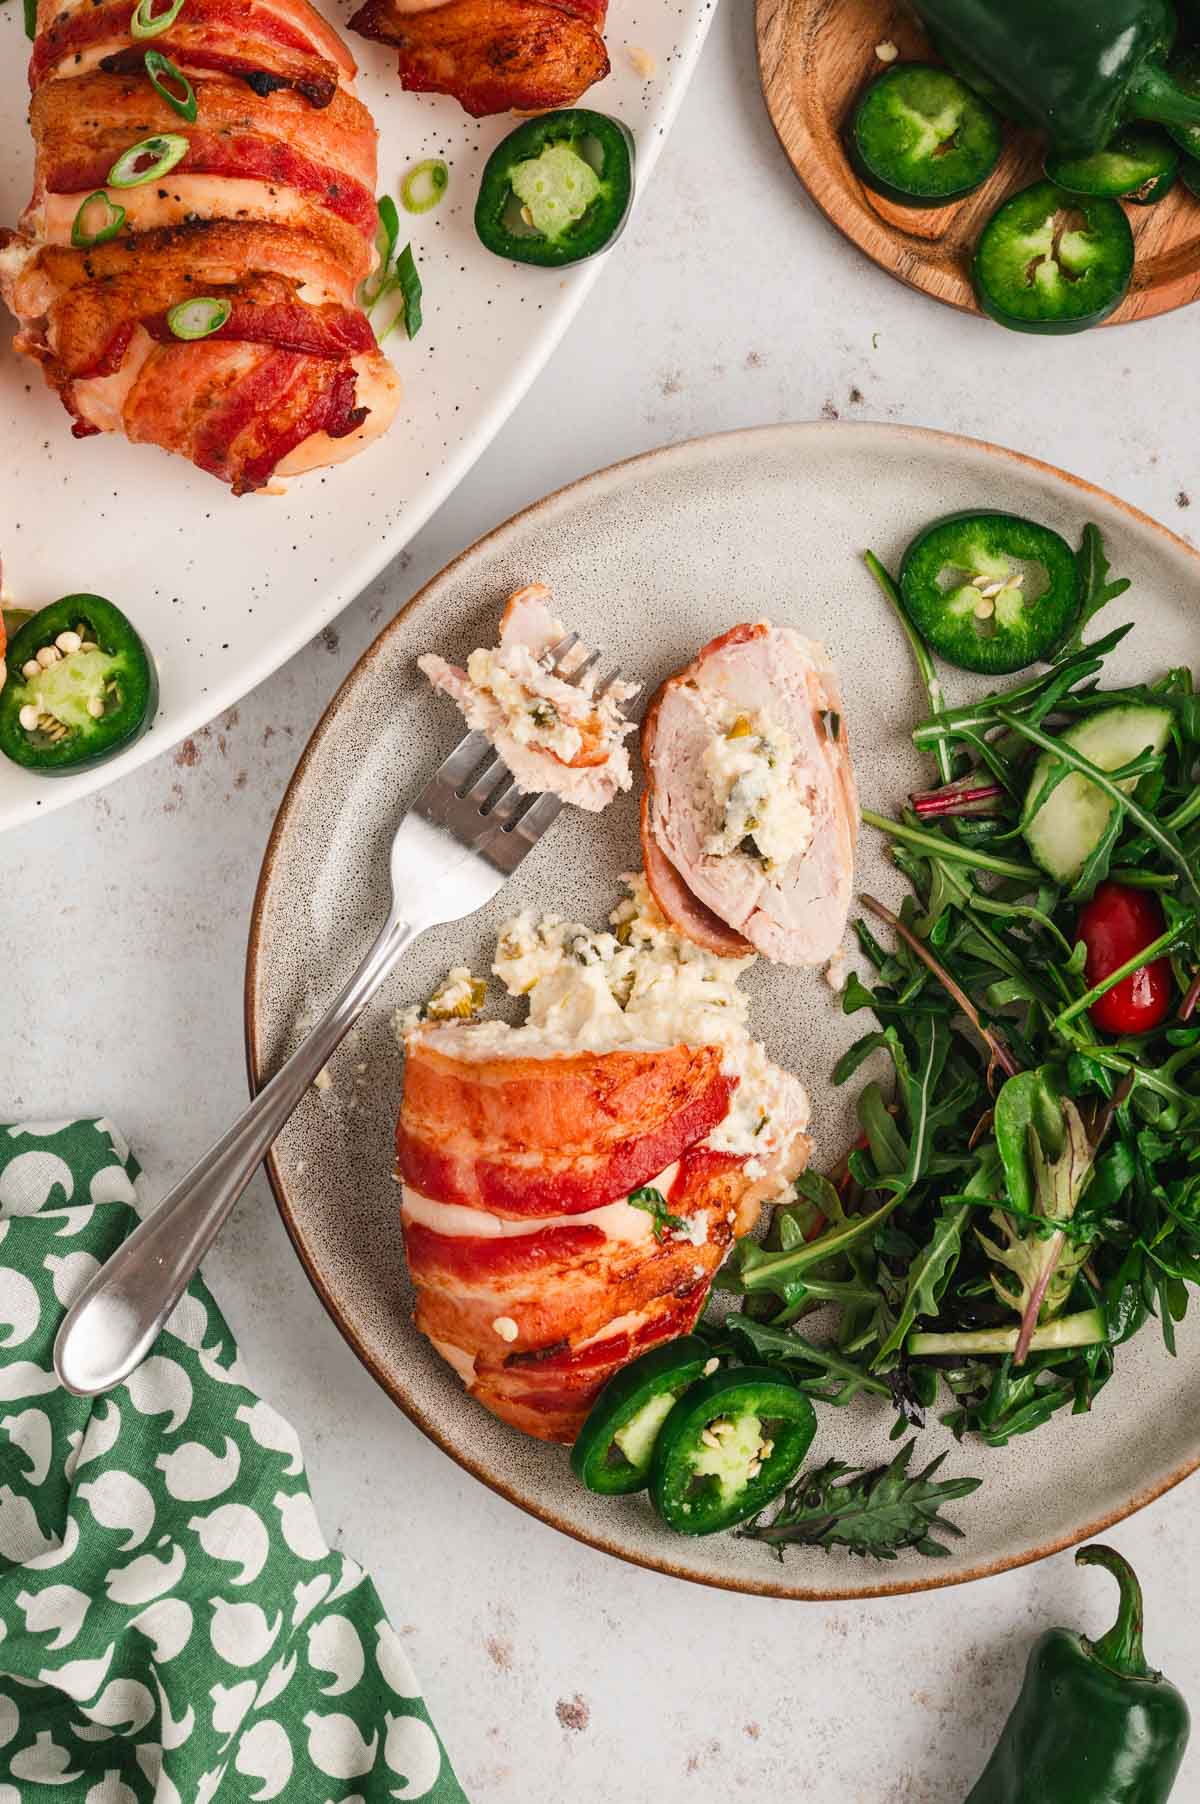 Bacon wrapped, jalapeno and cream cheese stuffed chicken on a plate with greens and a fork.